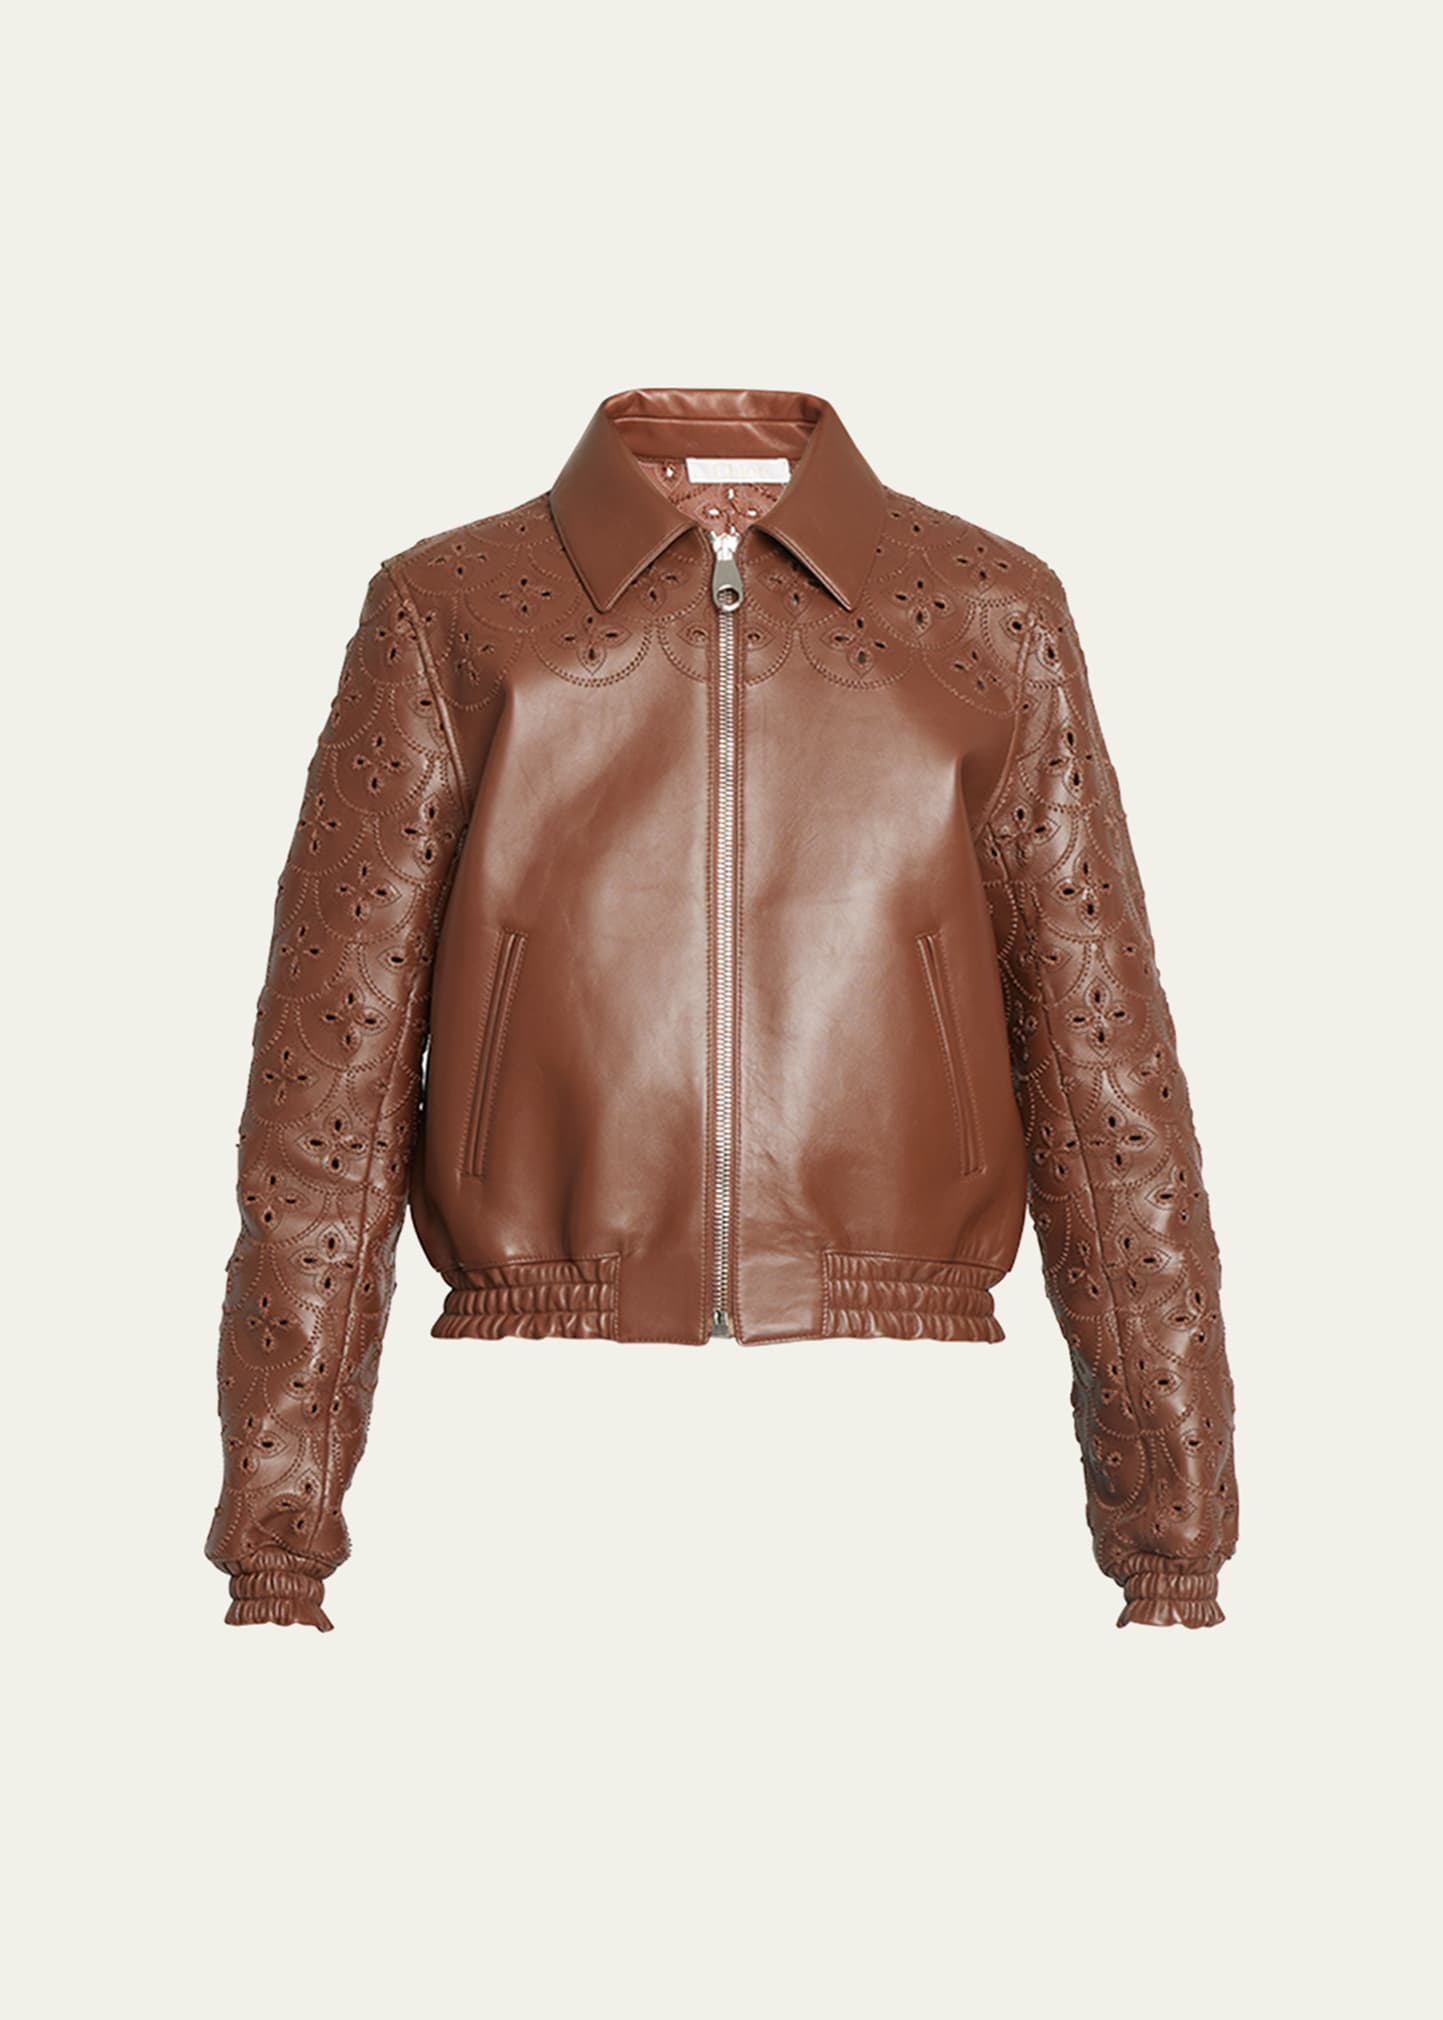 Chloé Leather Short Jacket With Cutout Eyelet Embroidery In Dark Chesnut